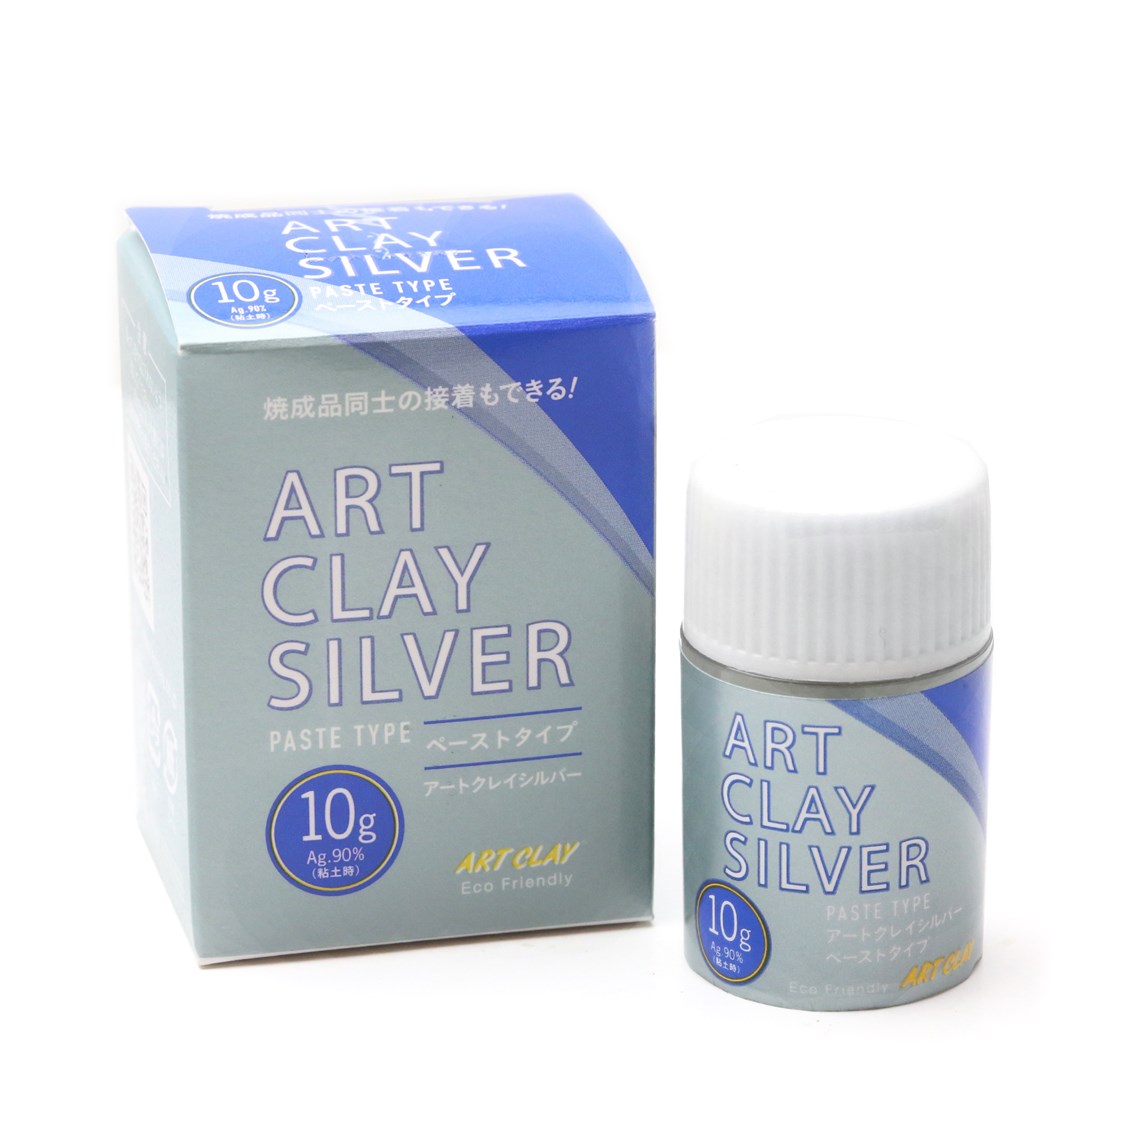 A-0285-Art-Clay-Silver-Paste Type-10g